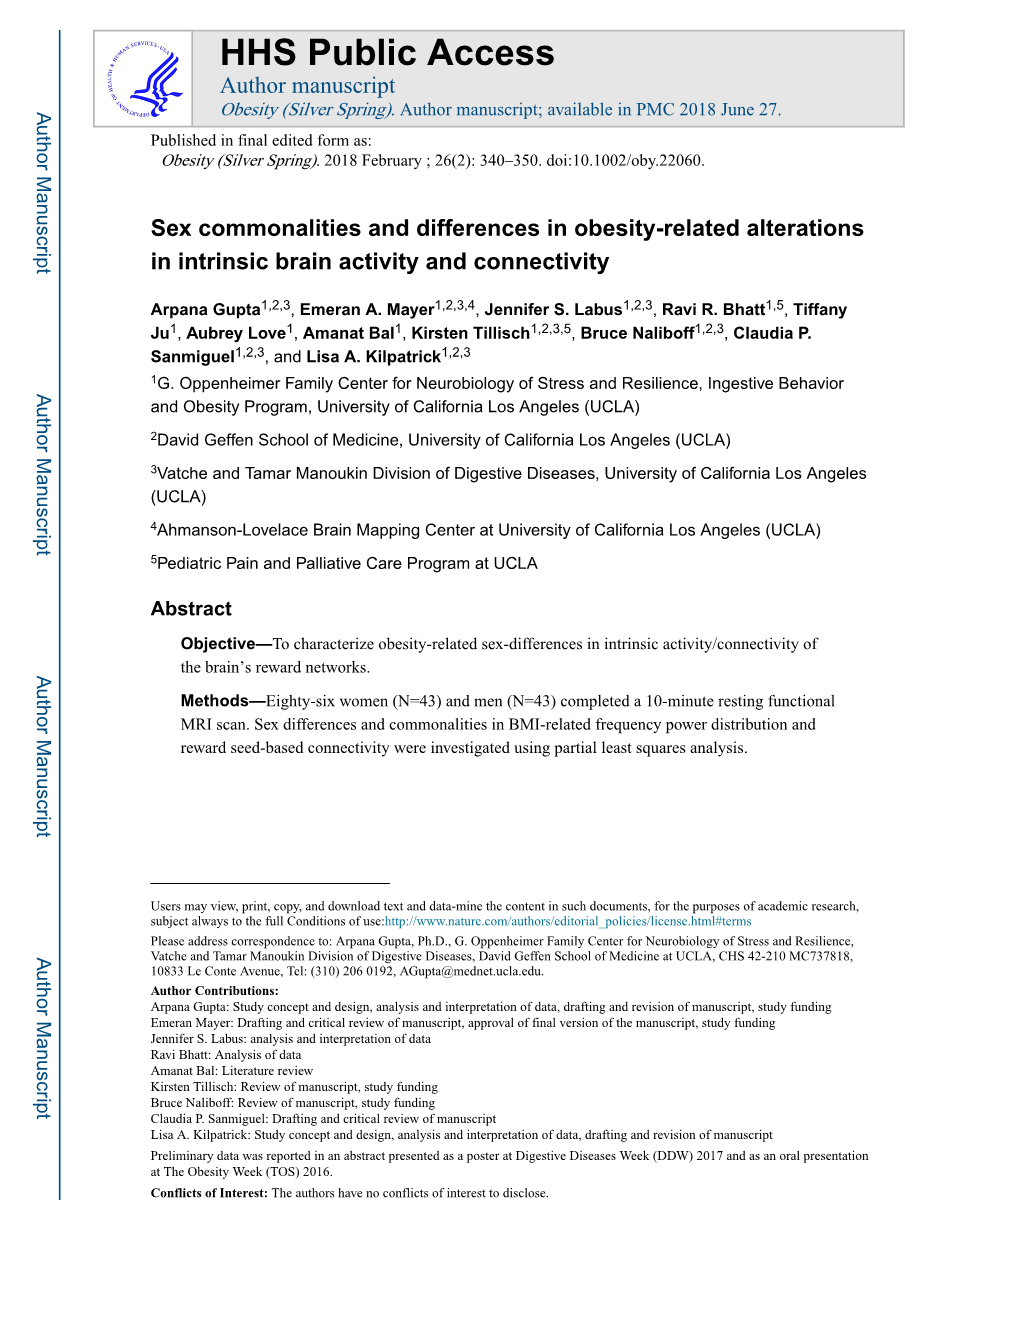 Sex Commonalities and Differences in Obesity-Related Alterations in Intrinsic Brain Activity and Connectivity